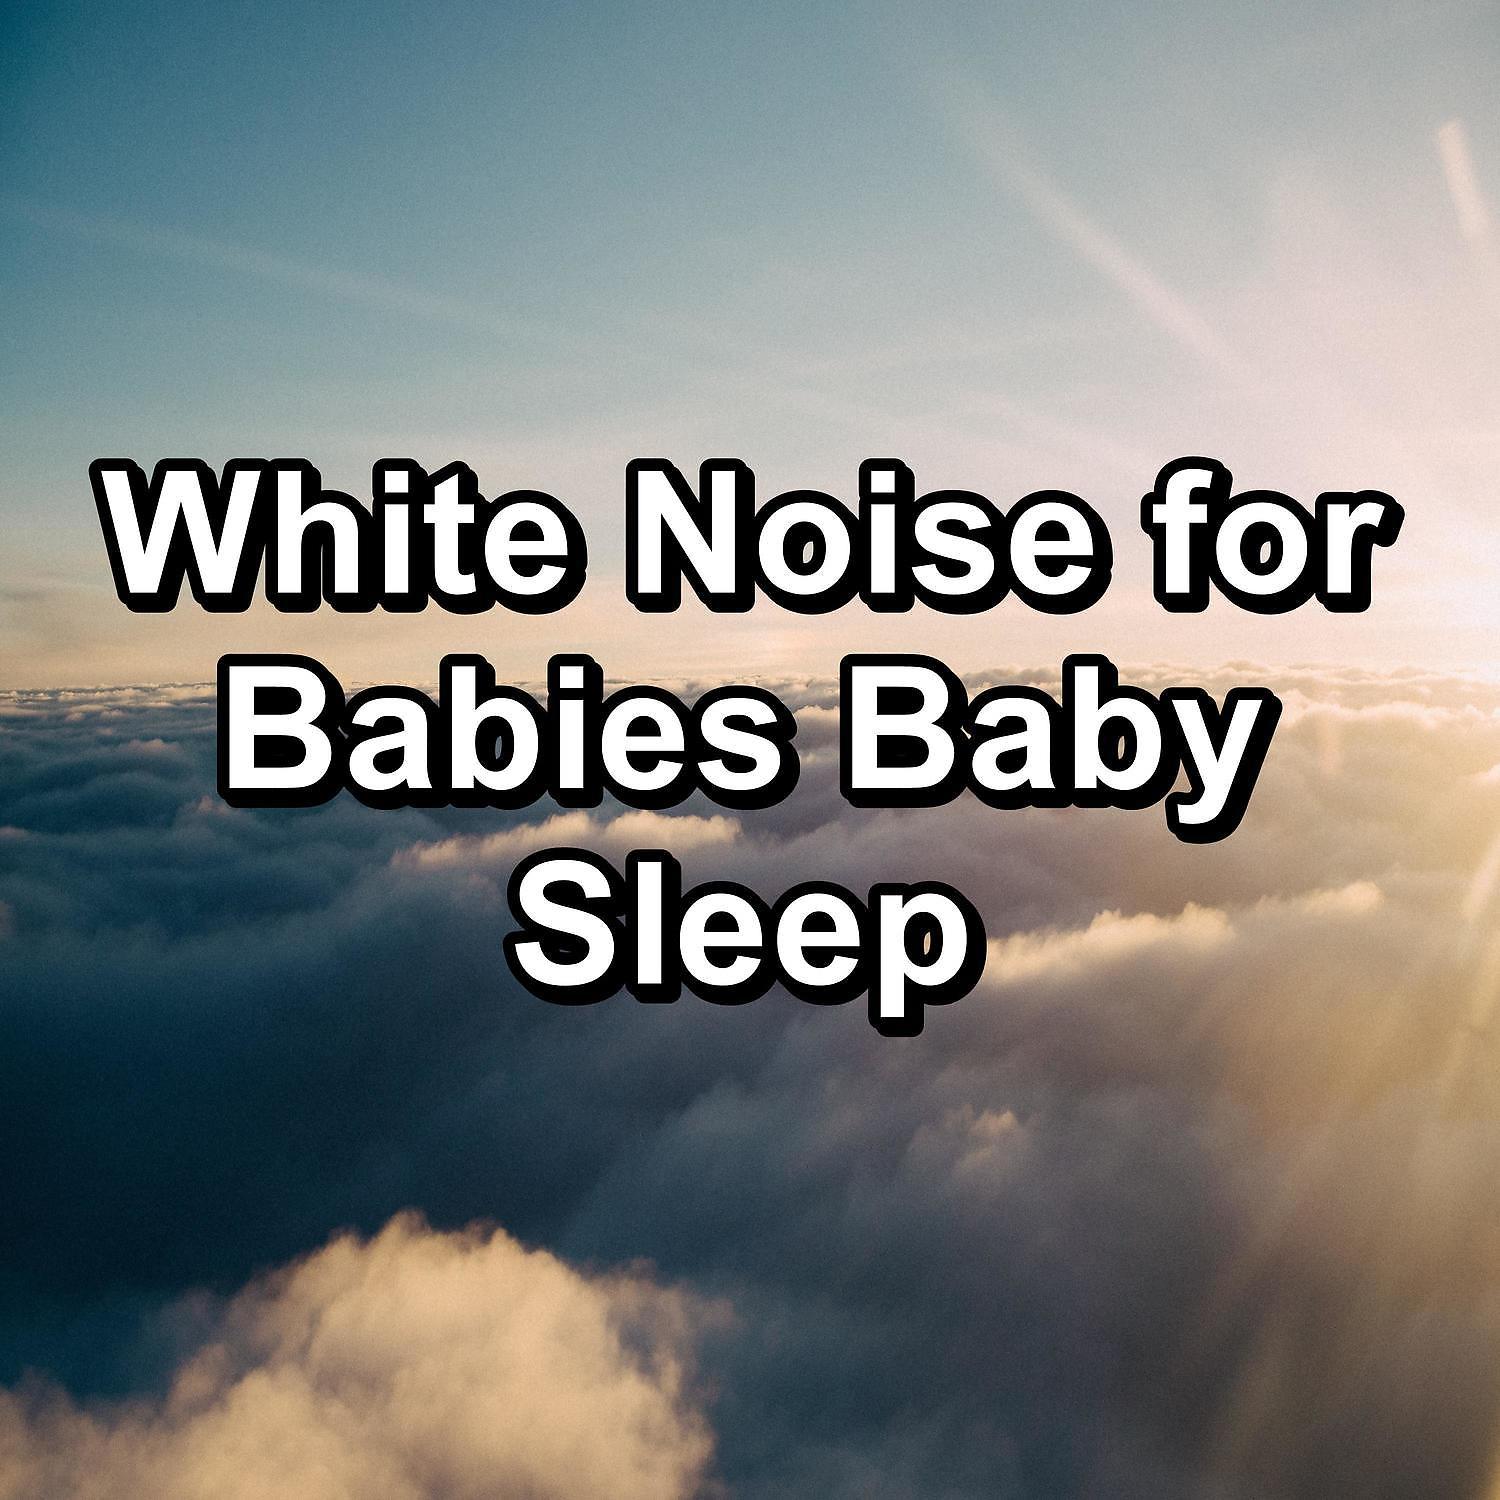 White Noise Sound, Pink Noise Sound, Brown Noise Sound - Medium Fan Sounds Anti Stress To Help your Babies Sleep